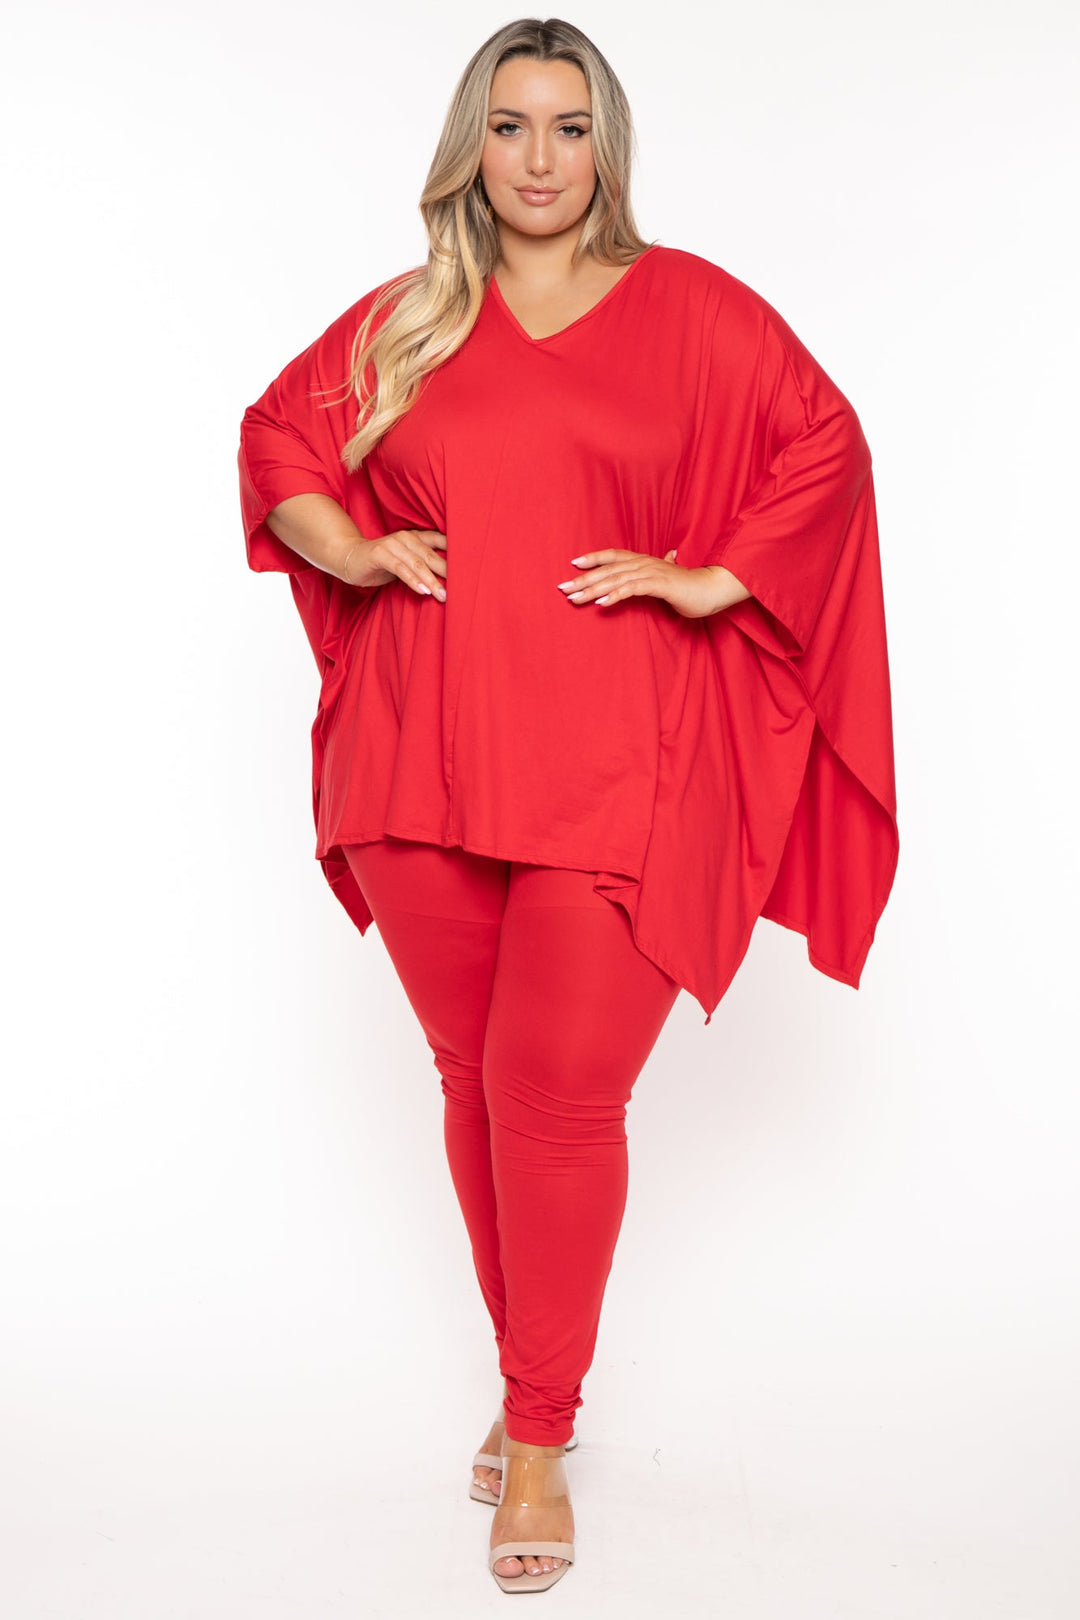 H & H FASHION Matching Sets 1X / Red A Plus Size Ronnah Top And Pant Set  - Red